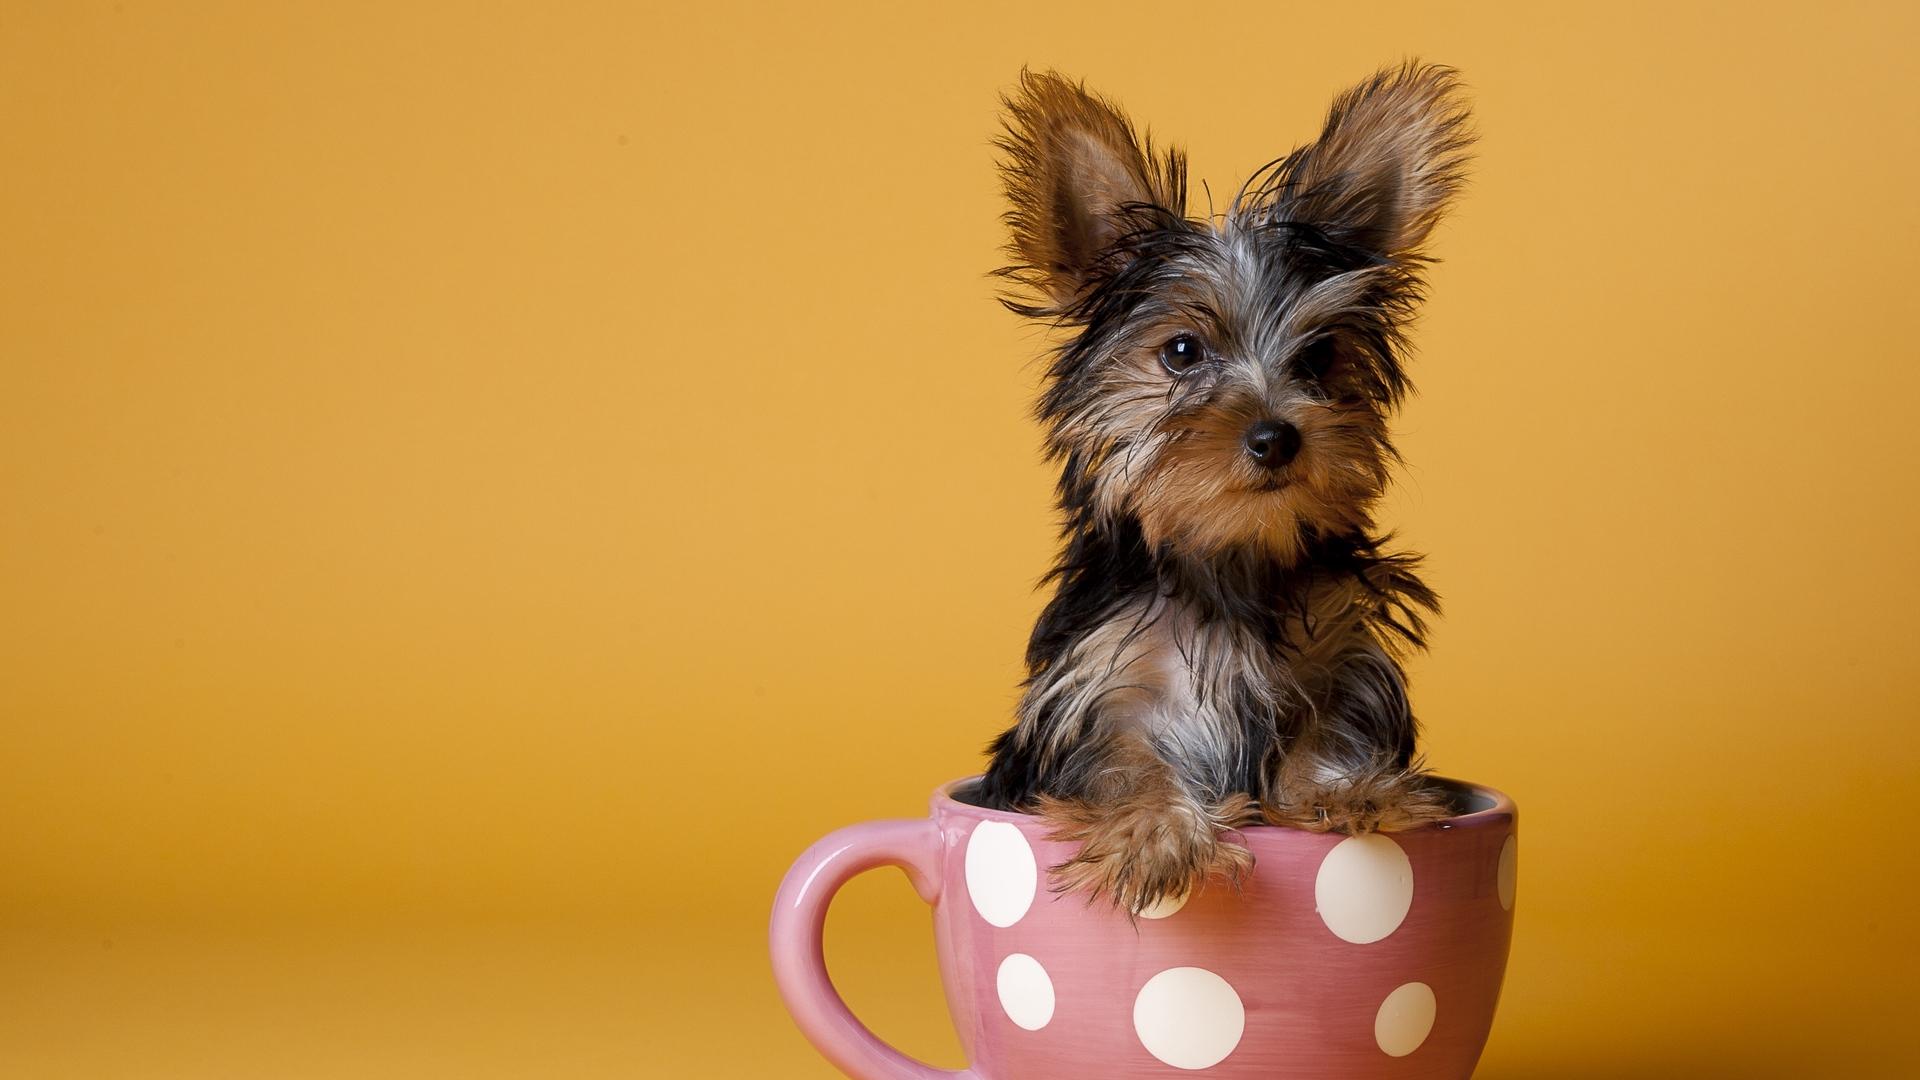 Download wallpaper 1920x1080 yorkshire terrier, cup, puppy, dog